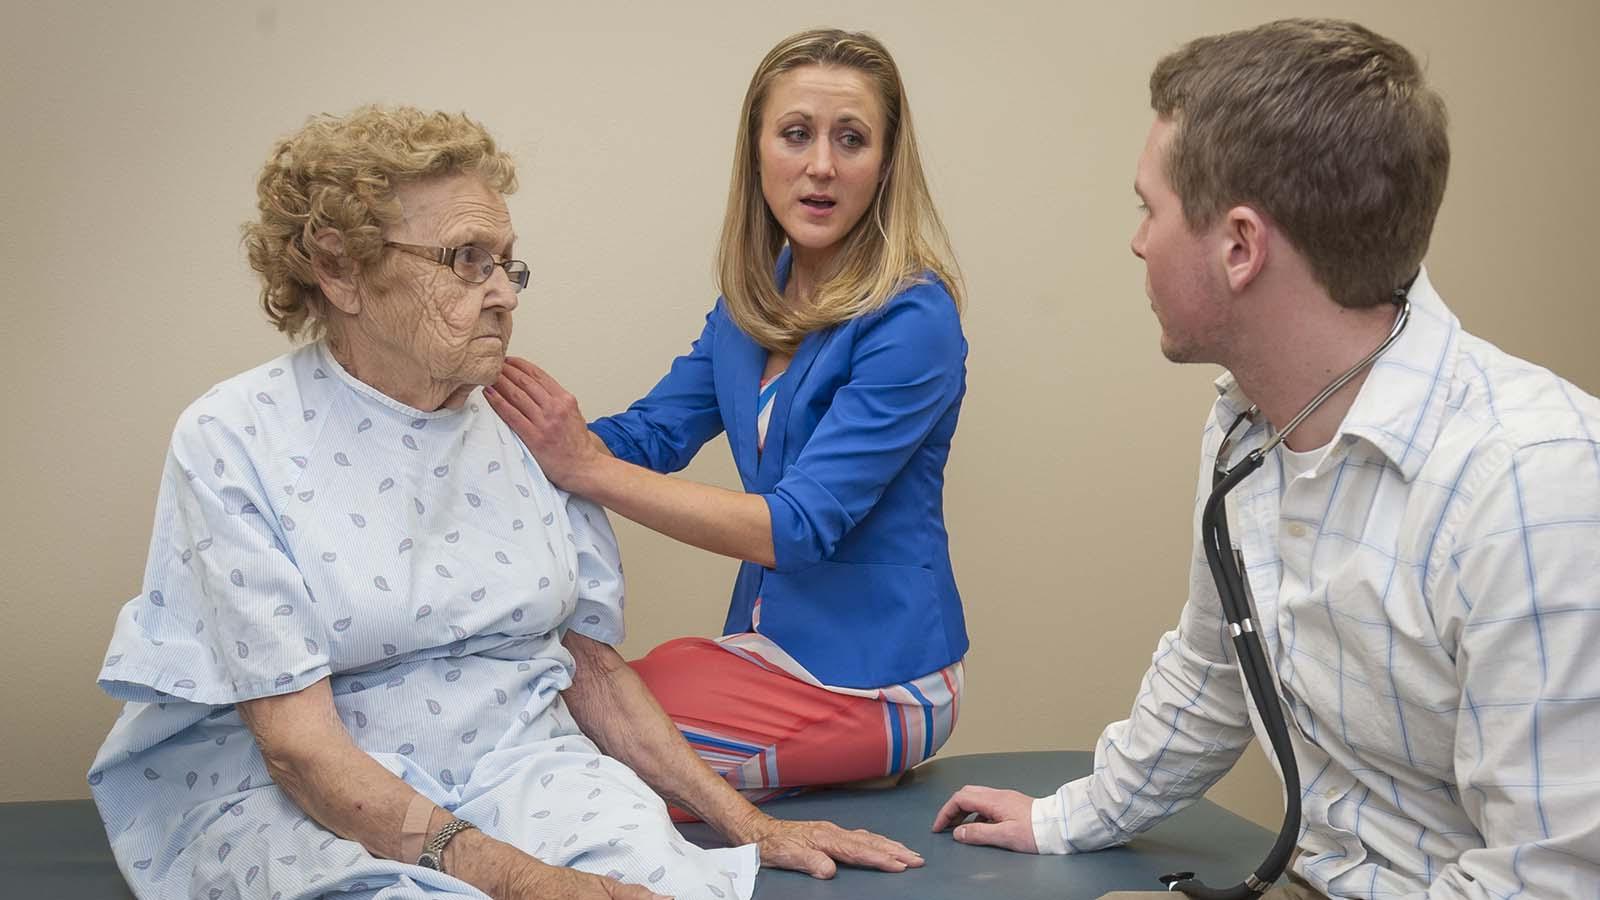 Physical therapy doctoral student and instructor meet with elderly client at the physical therapy clinic